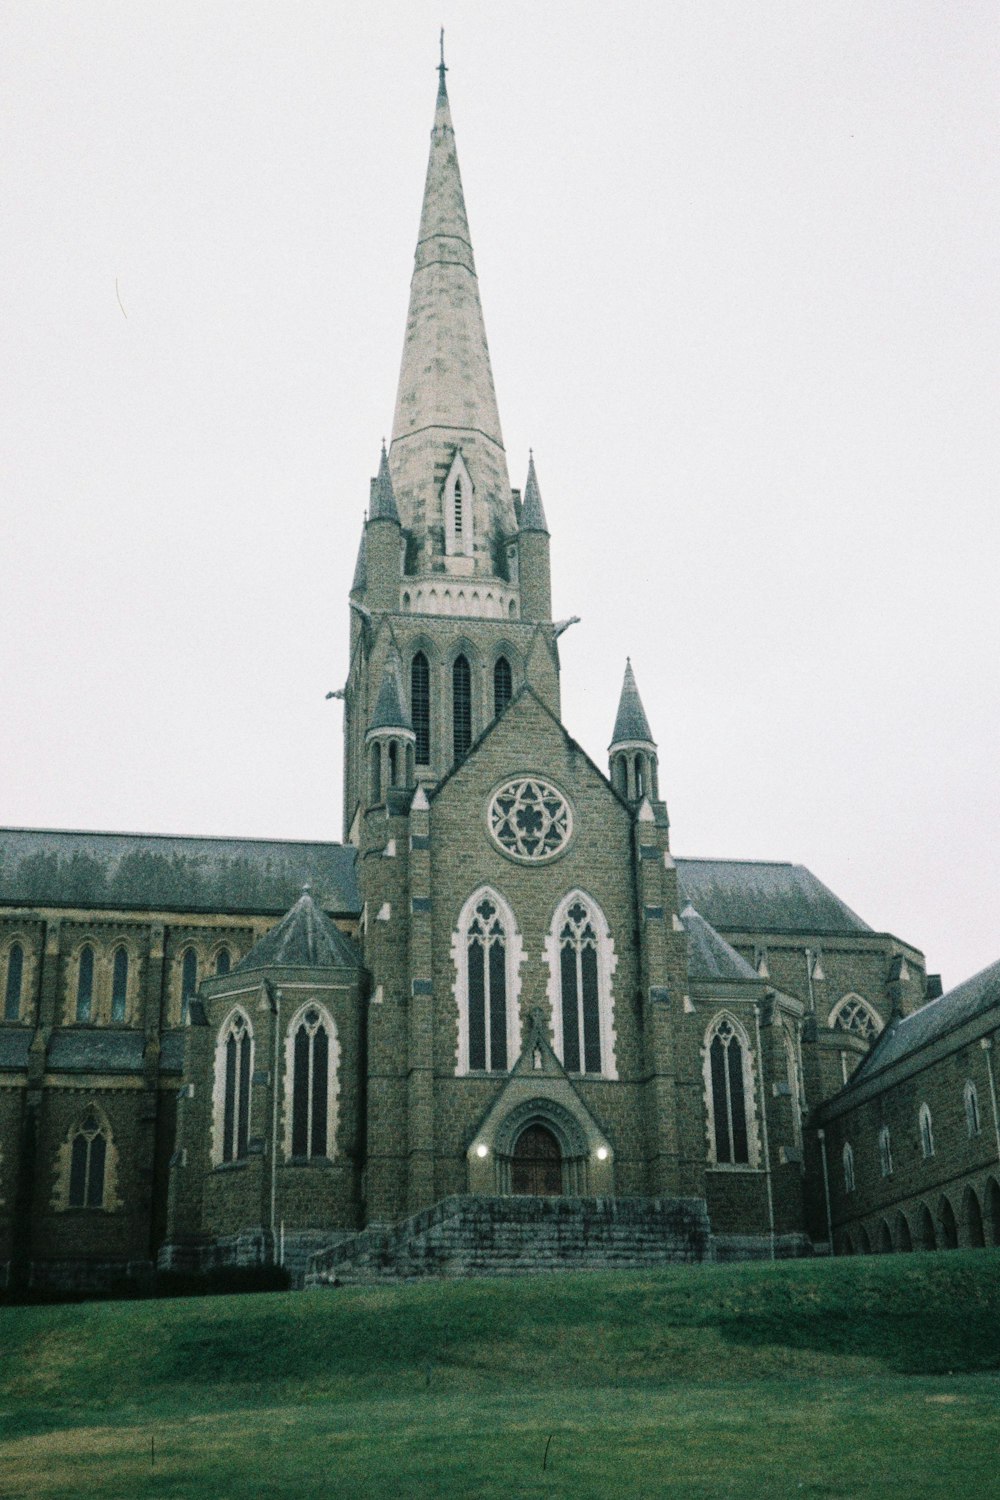 a large church with a steeple and a clock on it